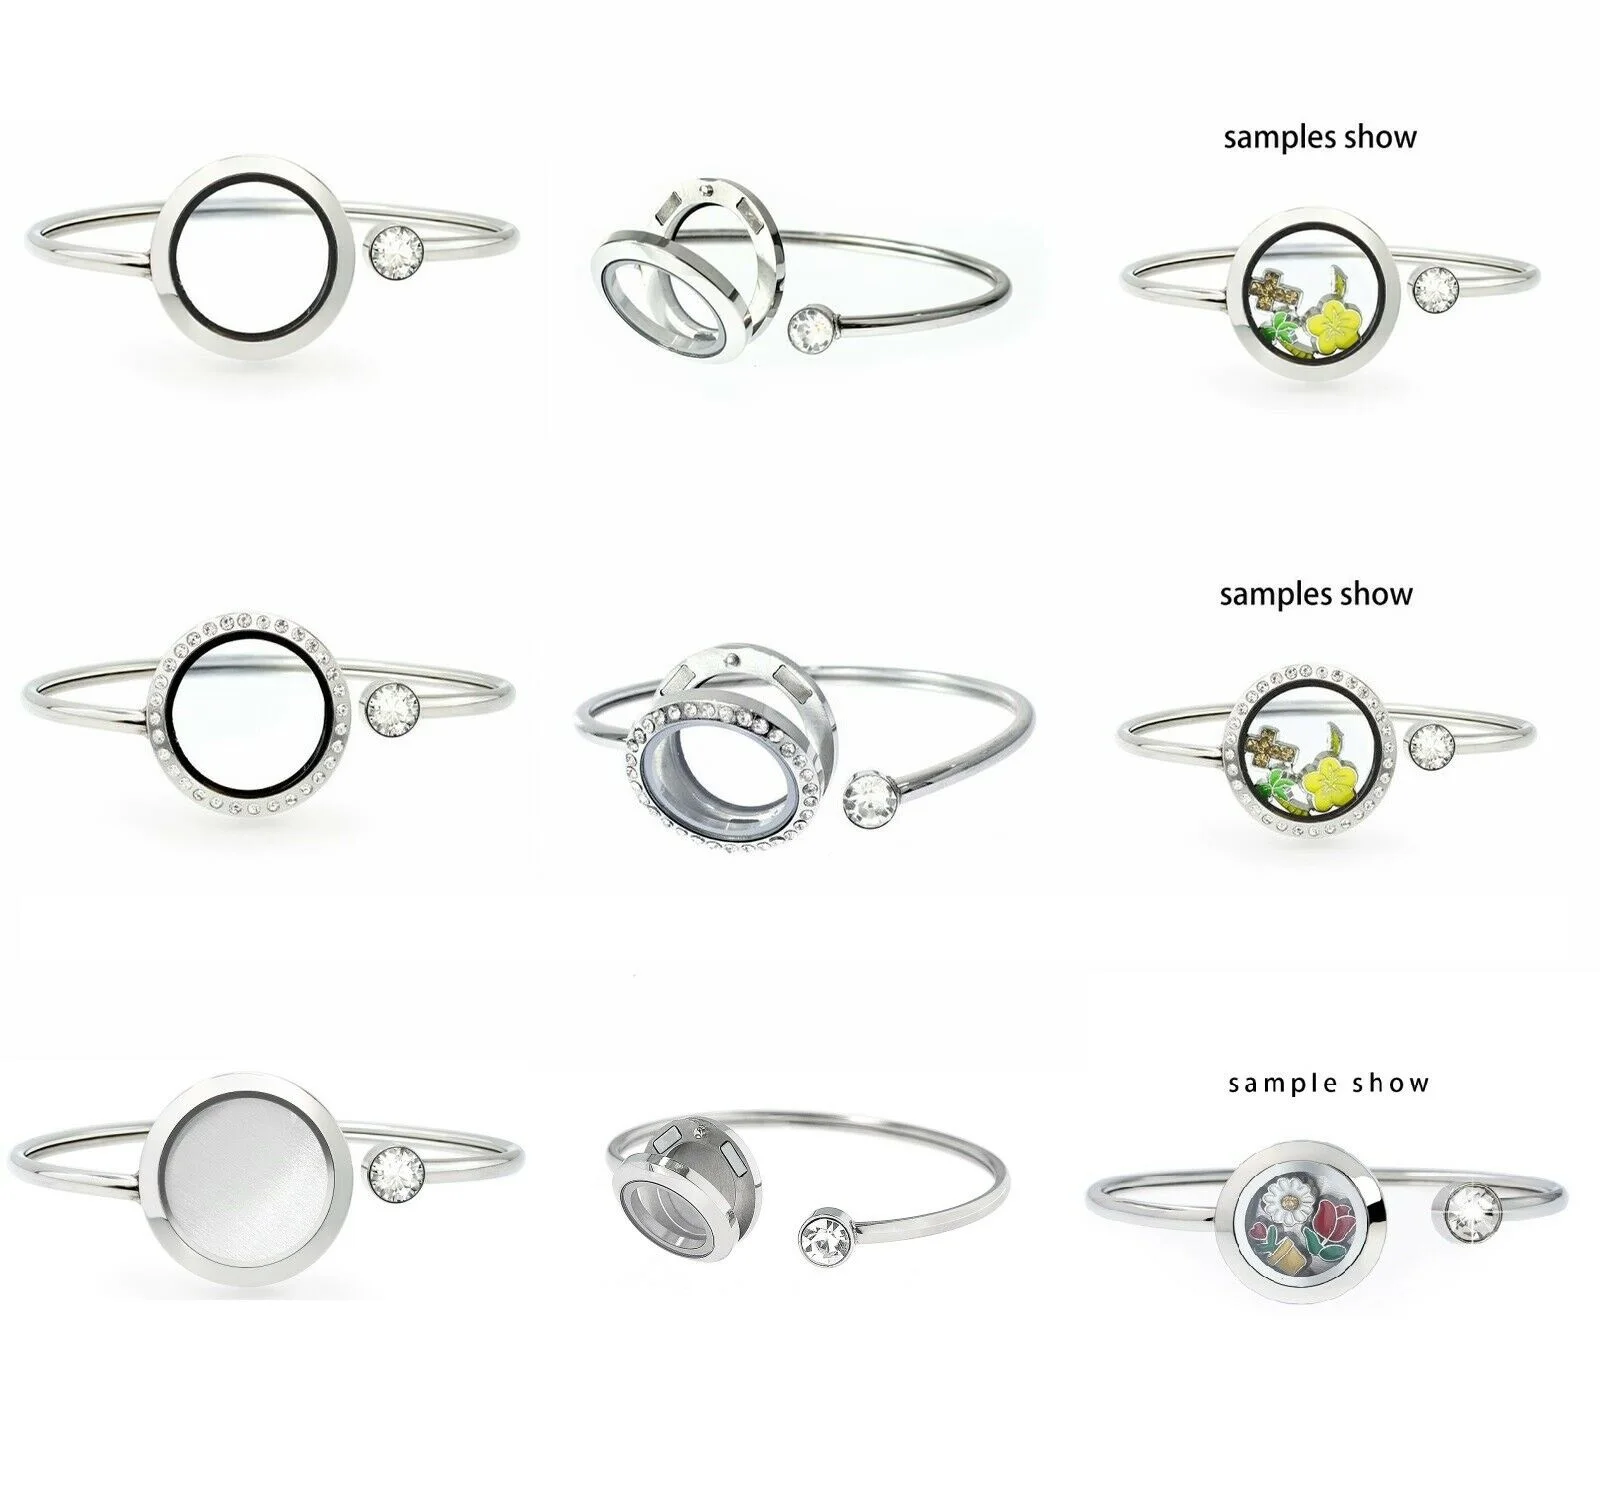 

Be in stock Multi-Style Floating Living Memory Glass Locket Pendant For Floating Living Charms In Memory Of, Silver